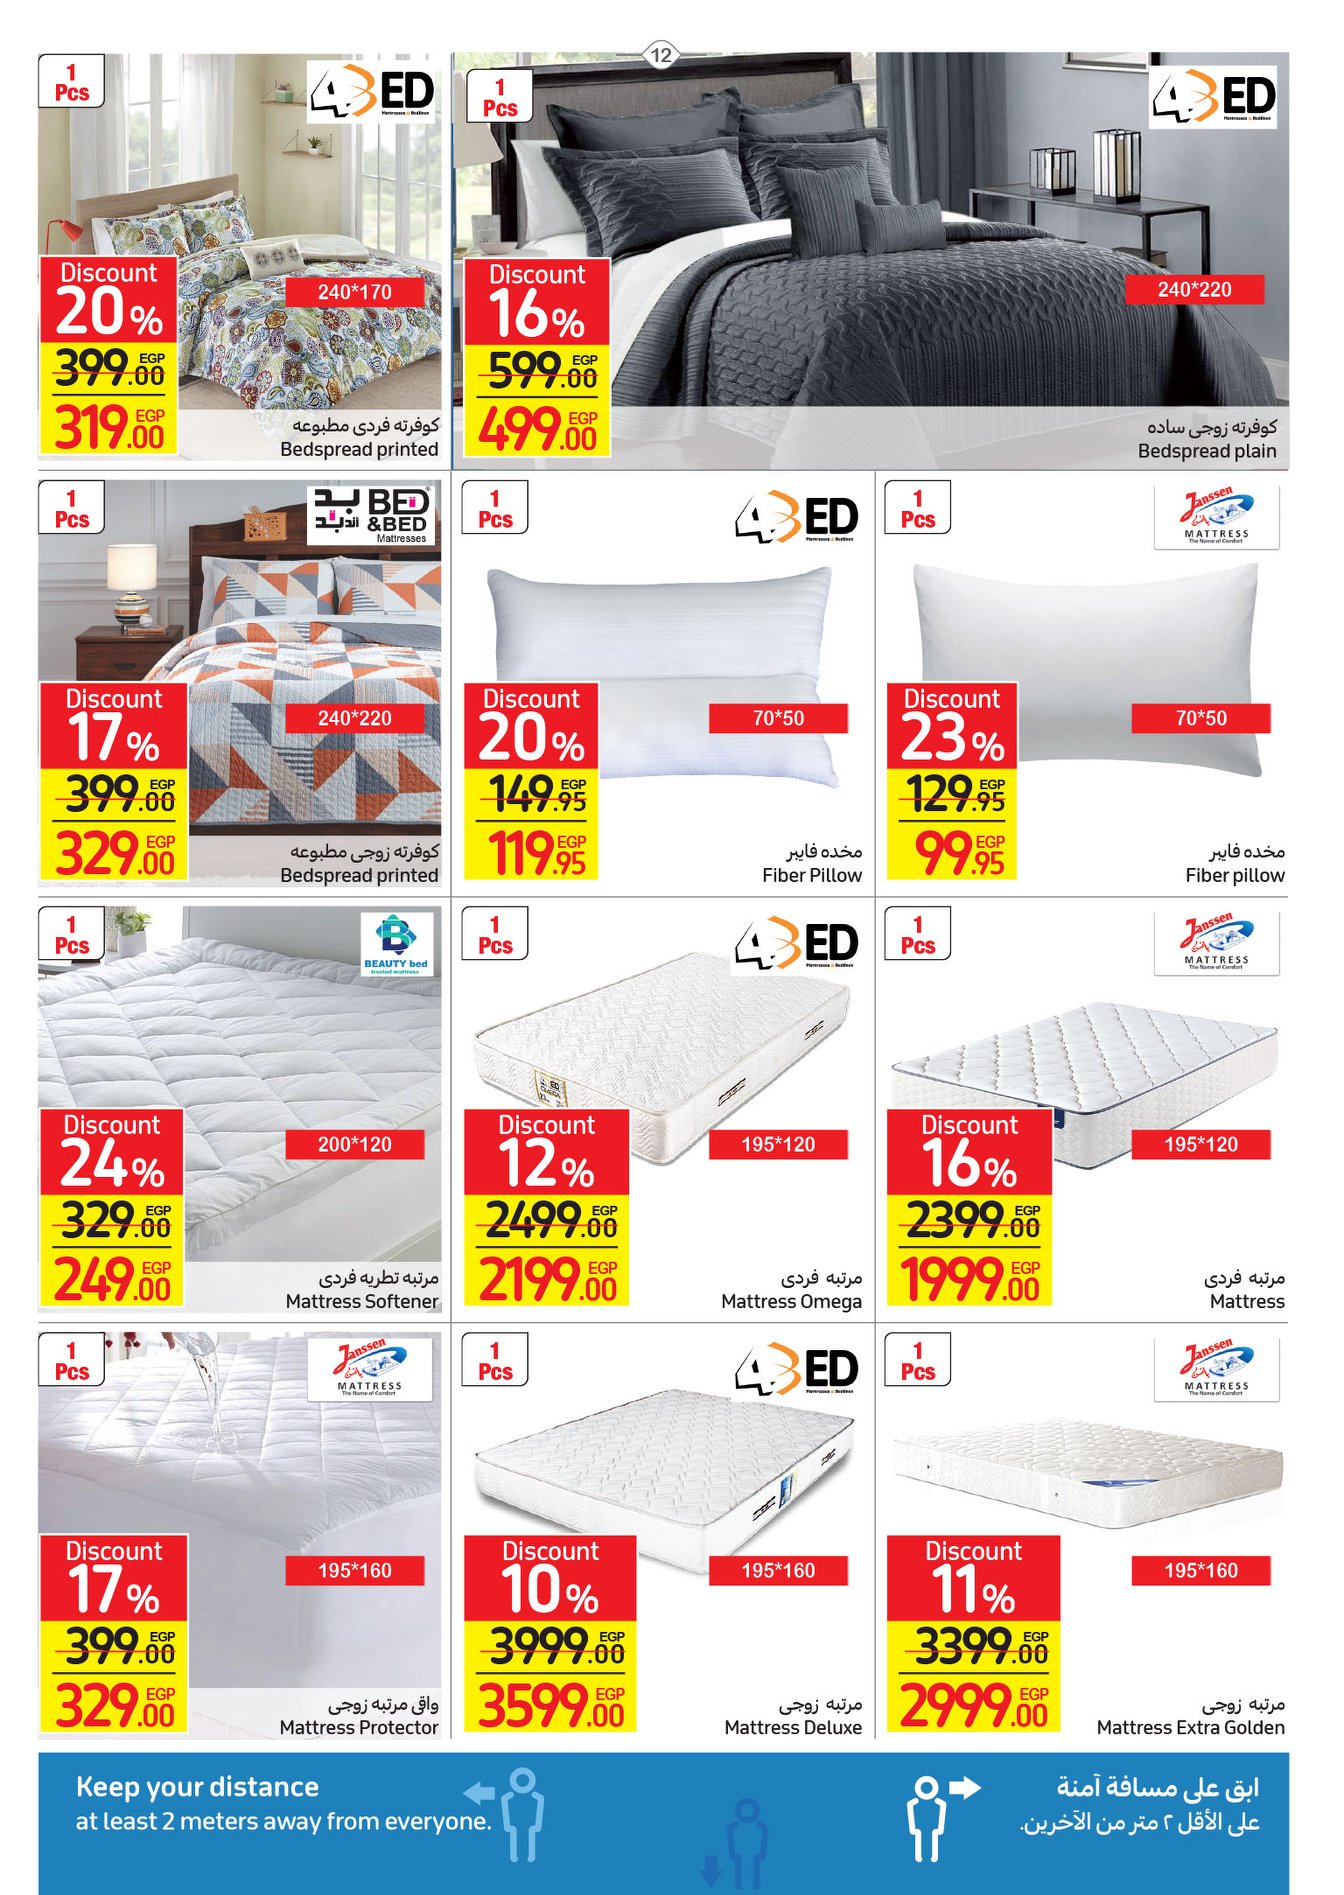 Enjoy now the strongest Carrefour offers from April 17-25, 2022.. Huge discounts on home essentials 13